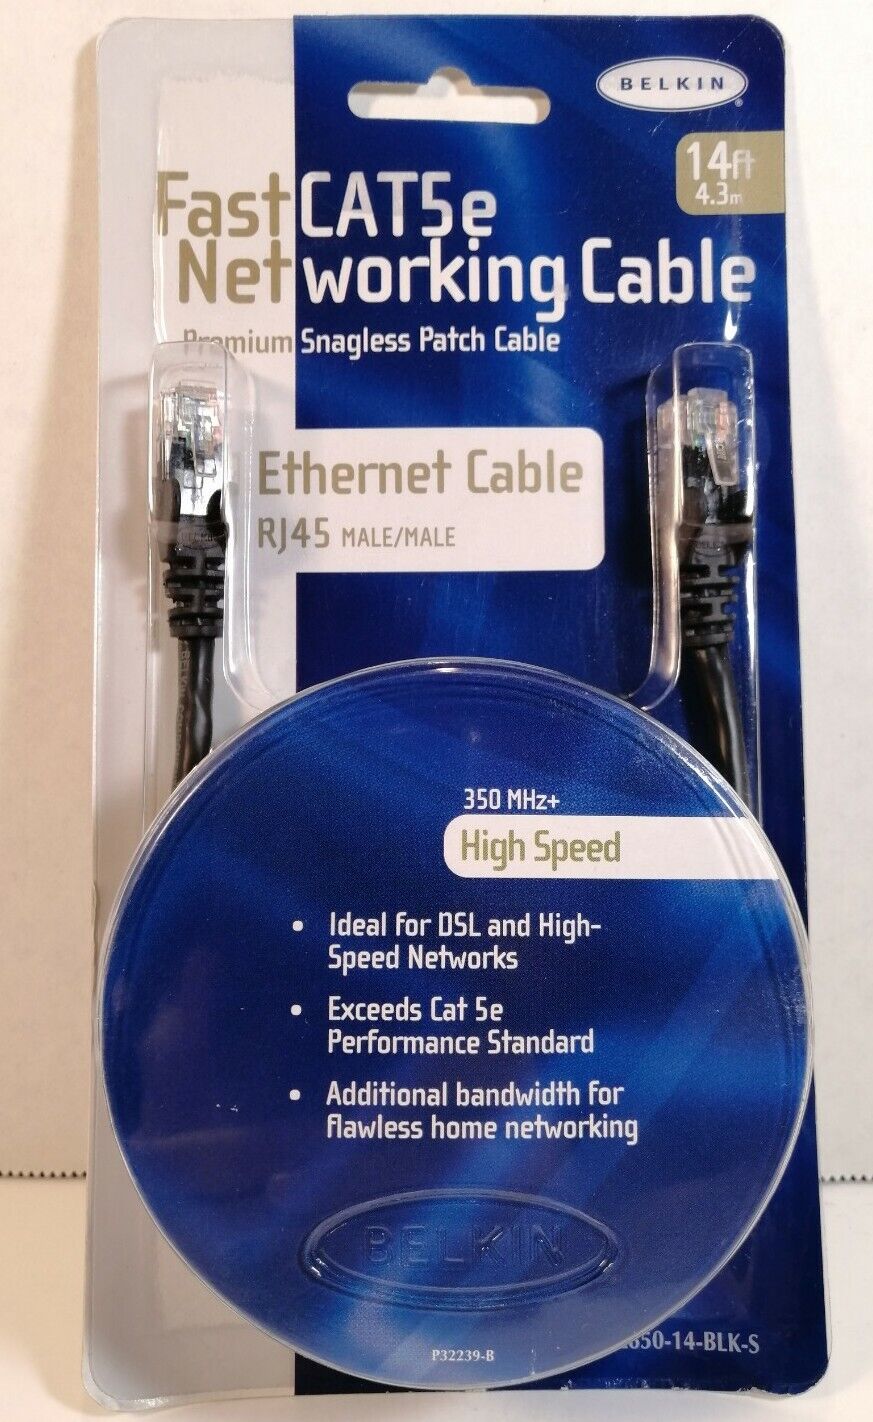 Belkin Fast CAT5e Networking Ethernet Cable RJ45 Male/Male 14 FT 4.2 M 350 MHz+